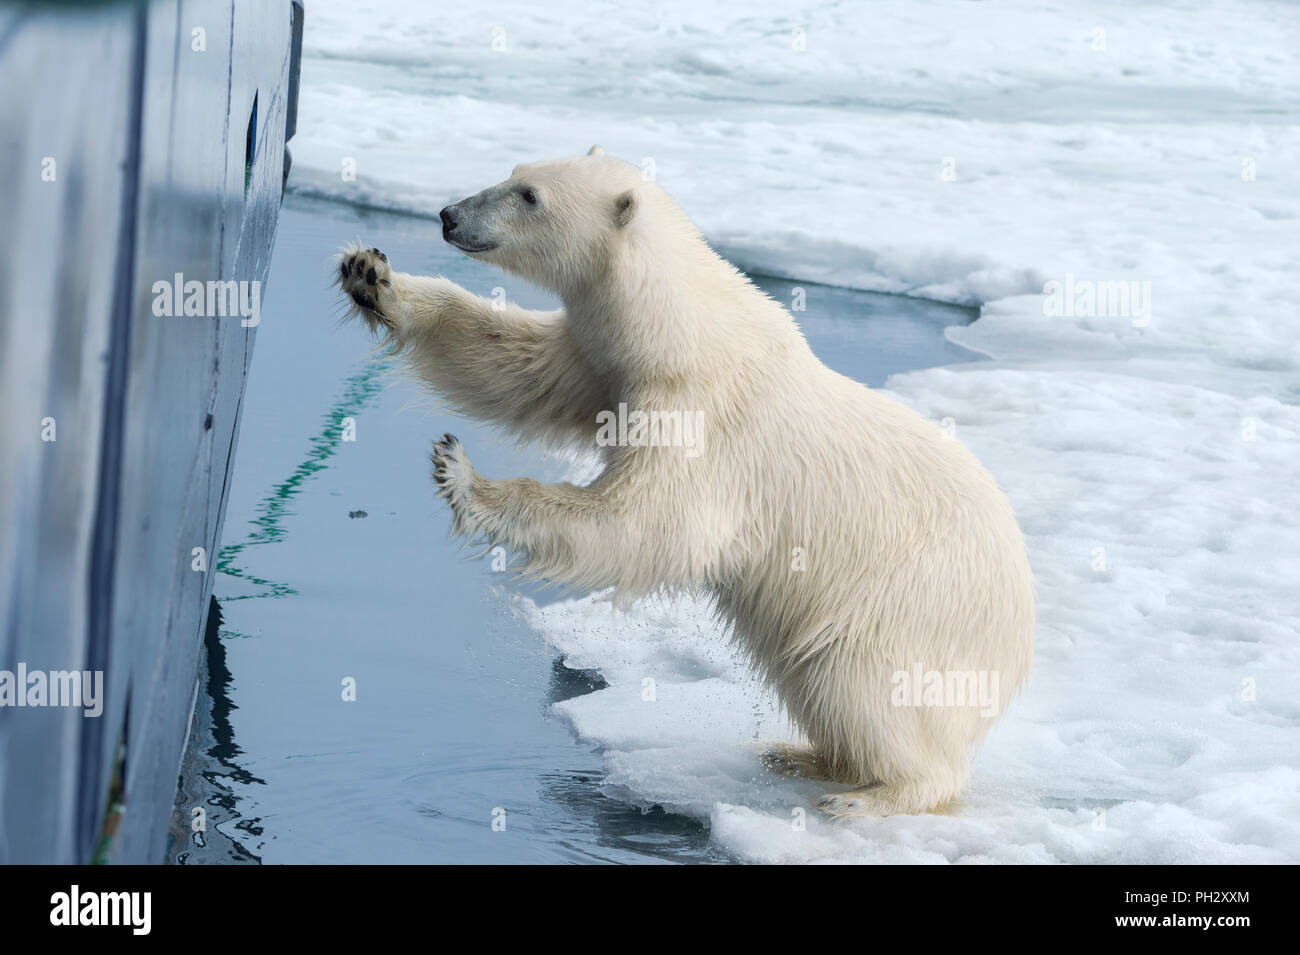 Curious Polar Bear (Ursus maritimus) springing on ship's hull and trying to enter through a porthole, Svalbard Archipelago, Norway Stock Photo